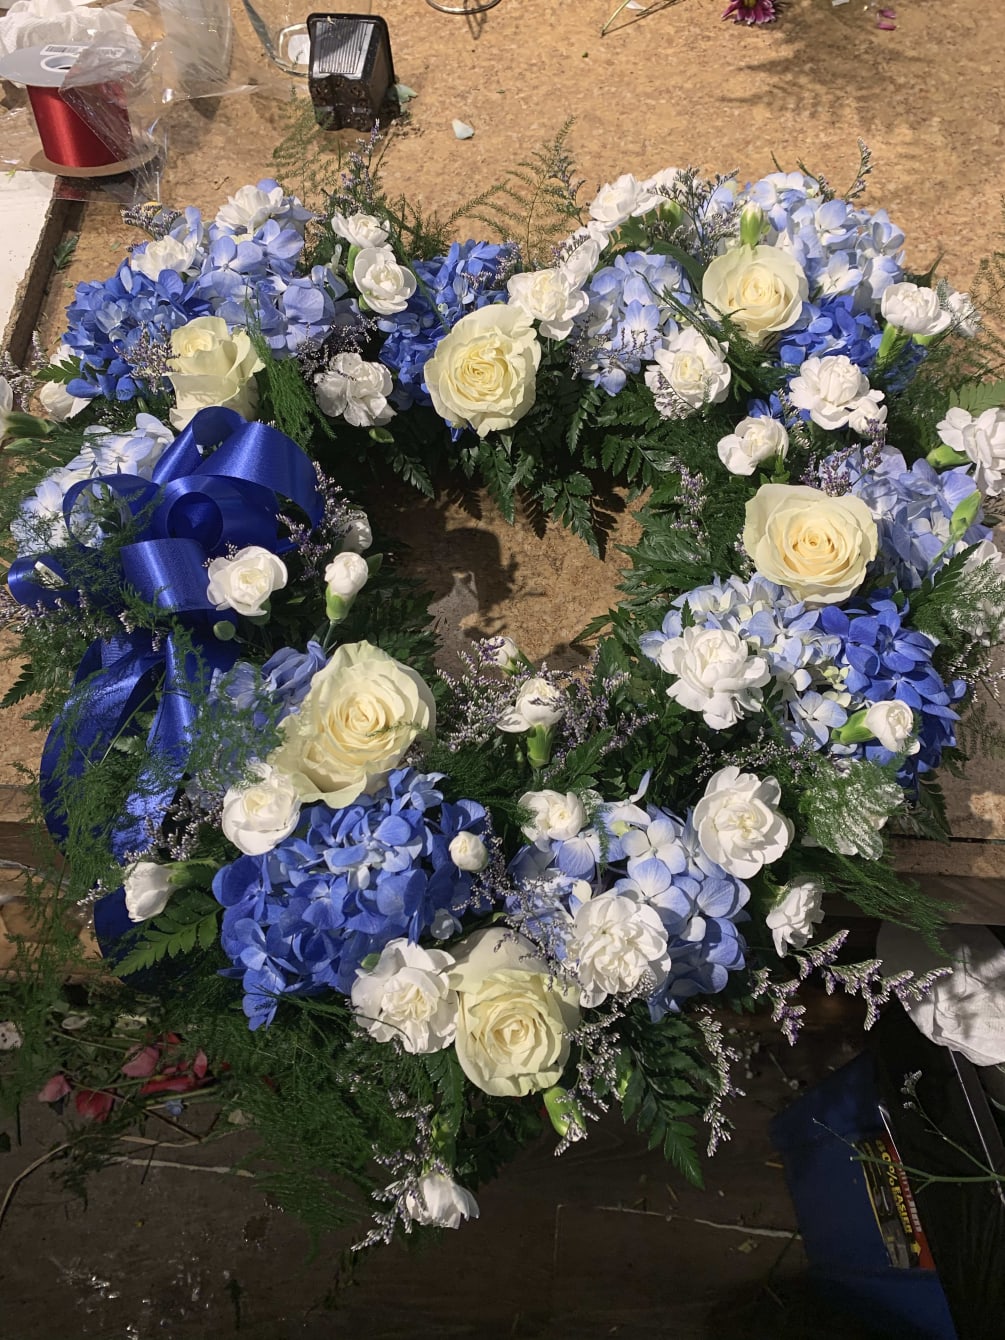 Beautiful Blue and white flowers for the service